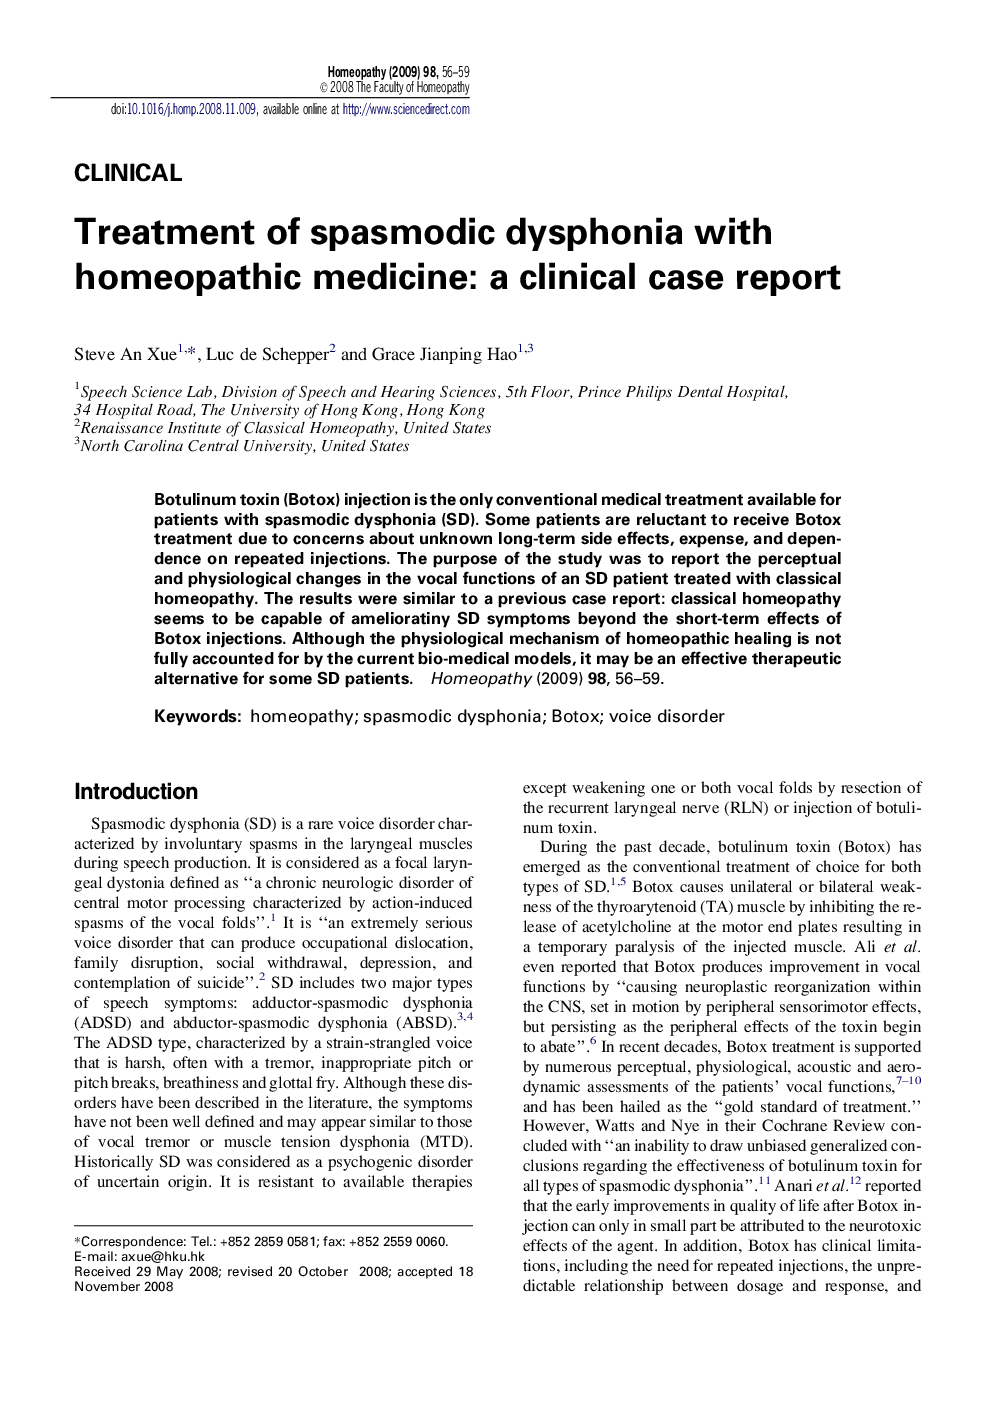 Treatment of spasmodic dysphonia with homeopathic medicine: a clinical case report